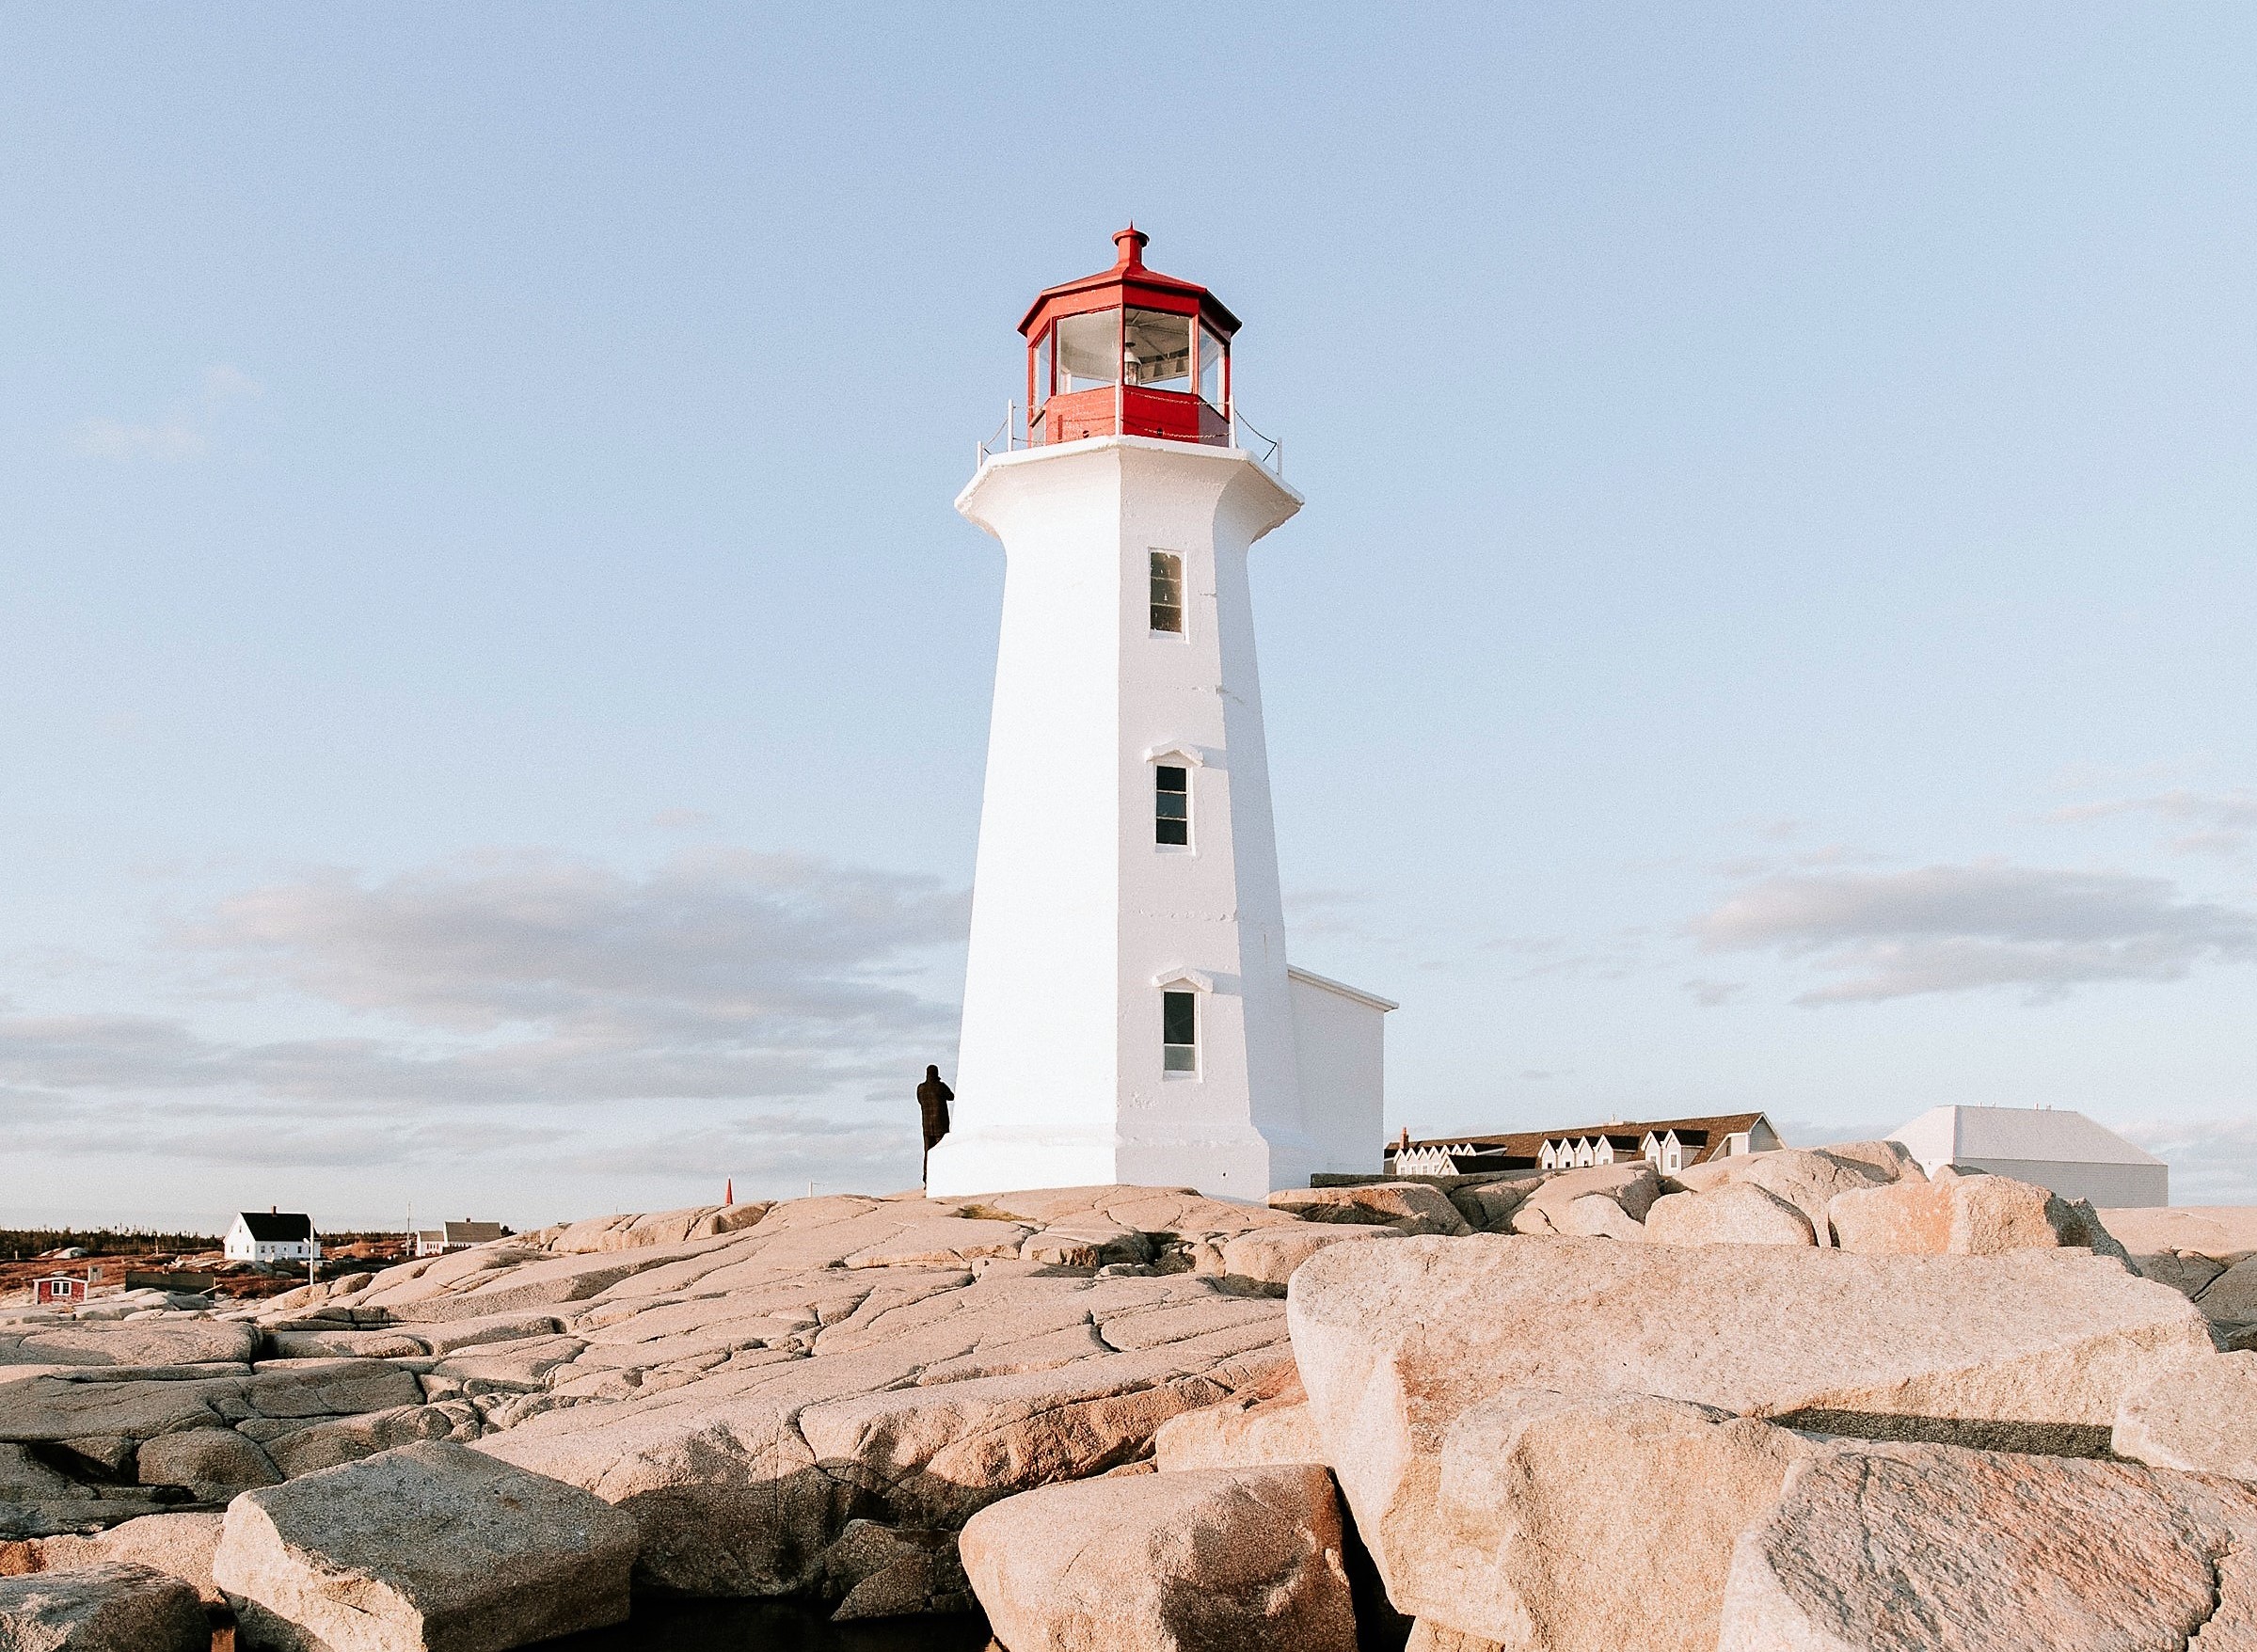 Peggy's Cove lighthouse stands tall in a clear blue sky on a bright and sunny day.